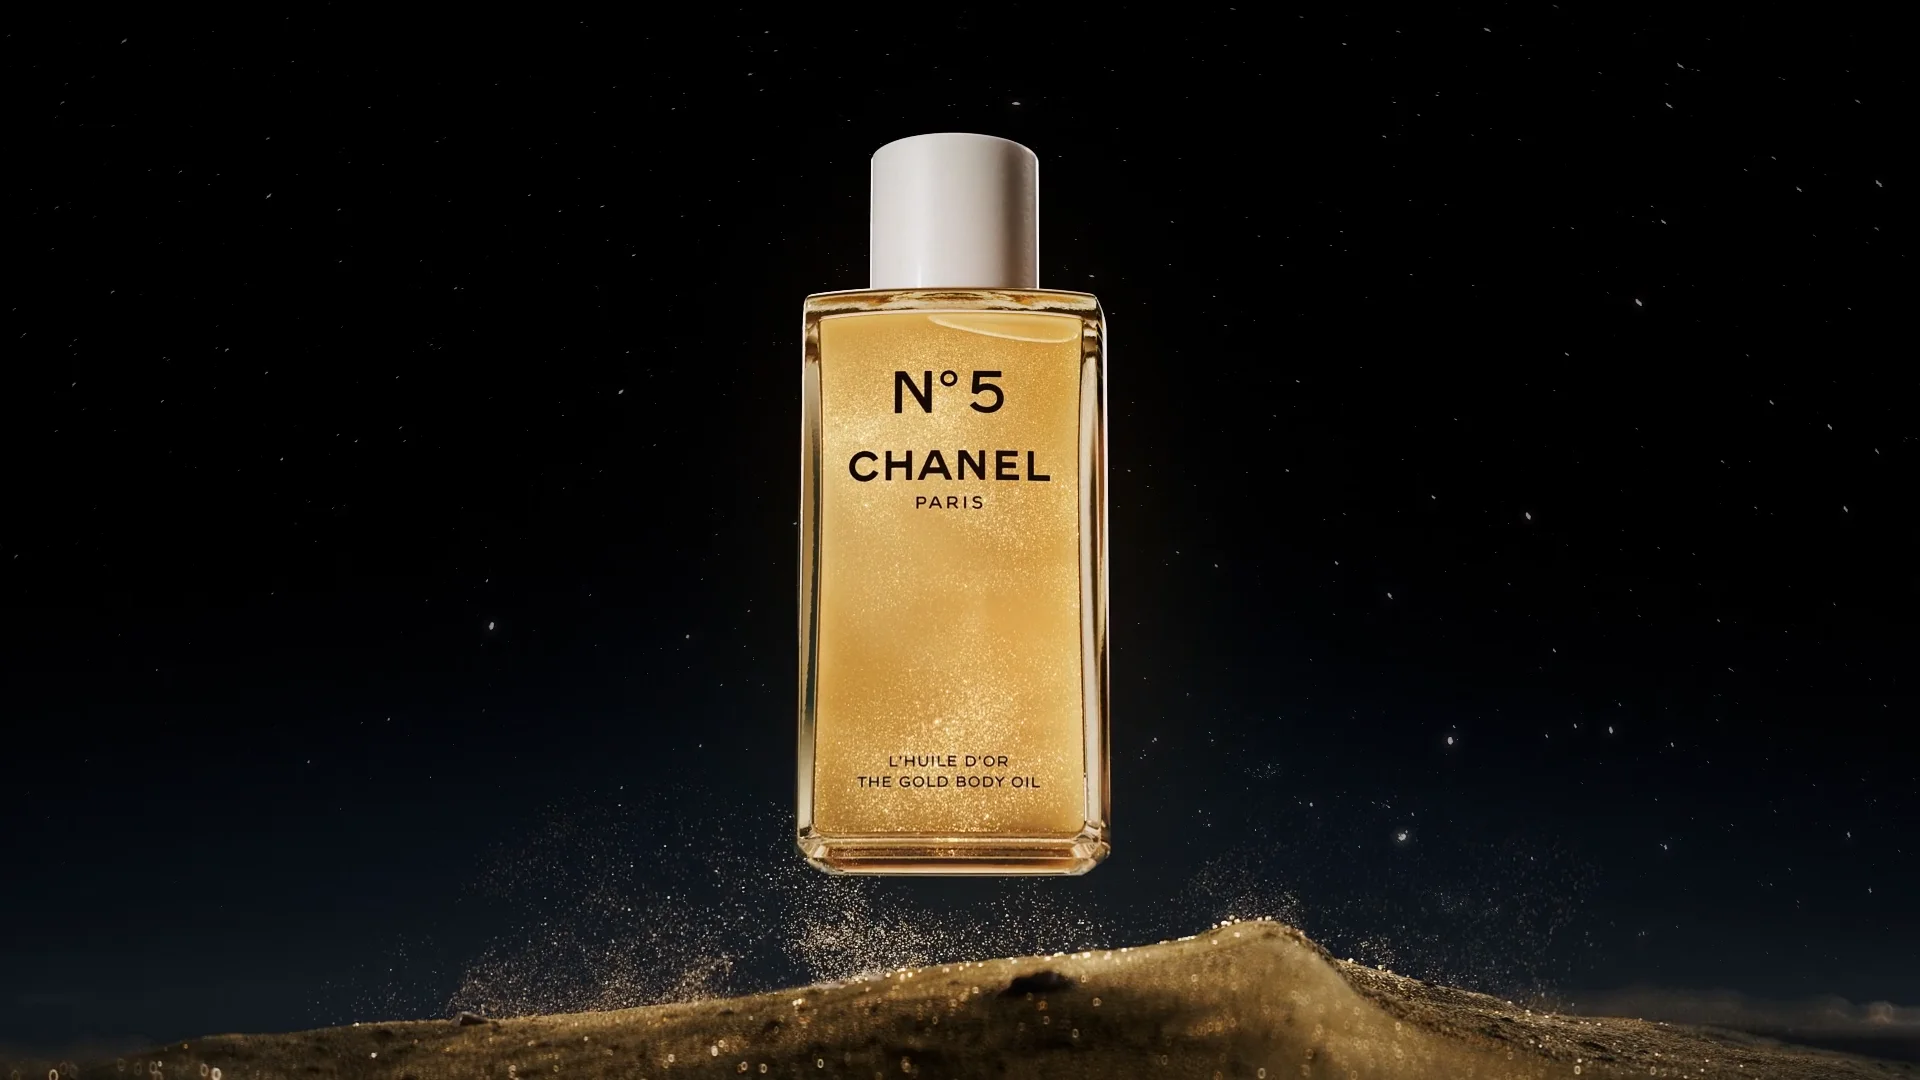 Chanel Huile D'Or N°5 on Vimeo